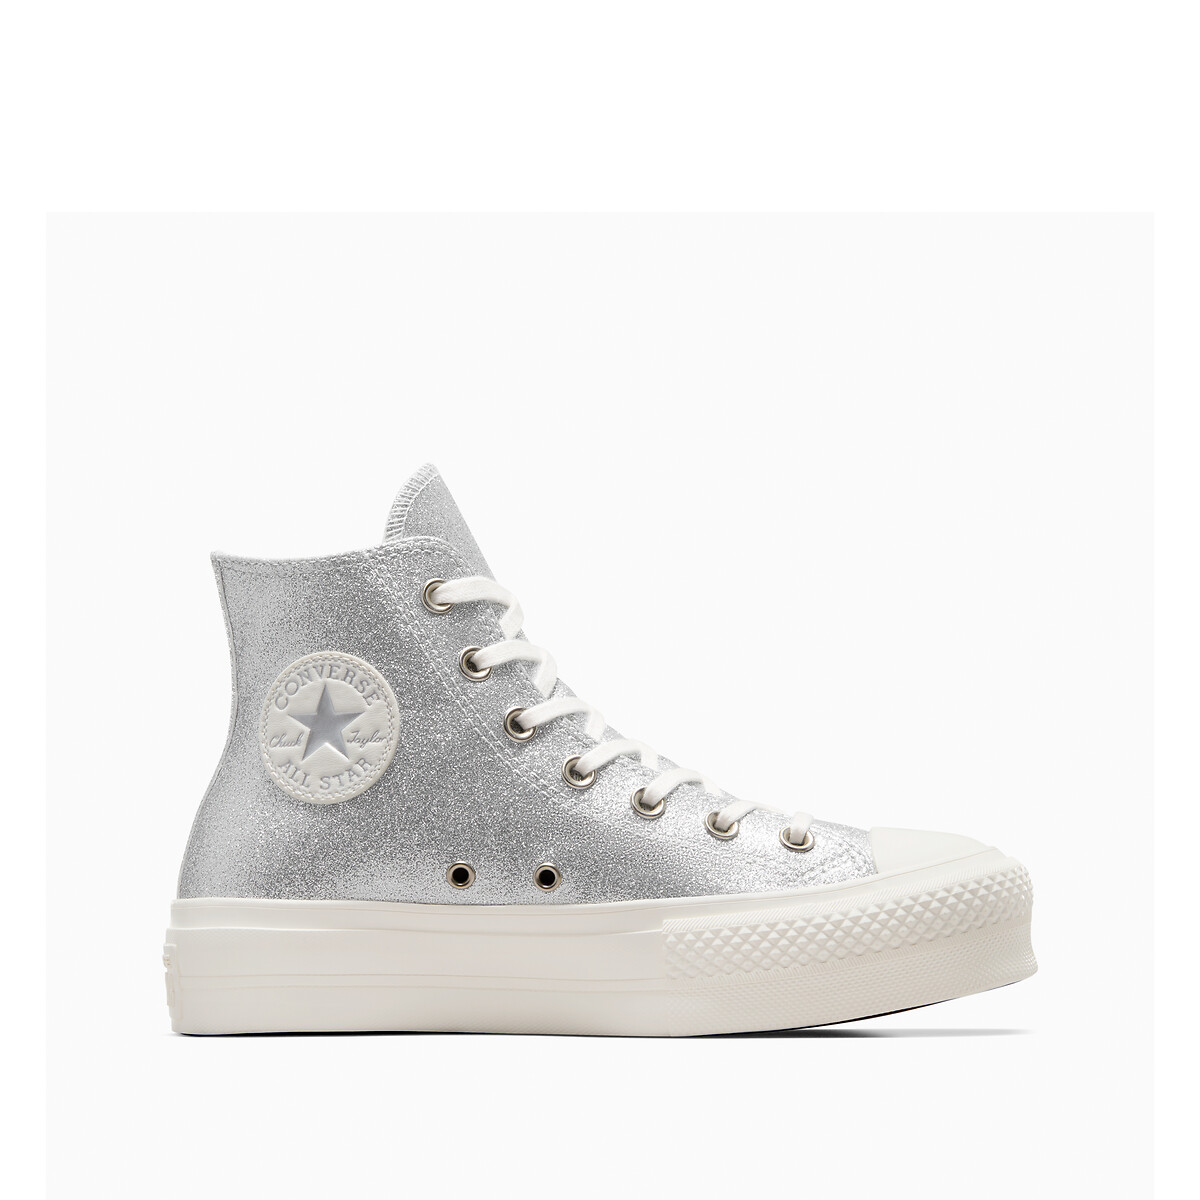 All Star Lift Hi Sparkle Party High Top Trainers